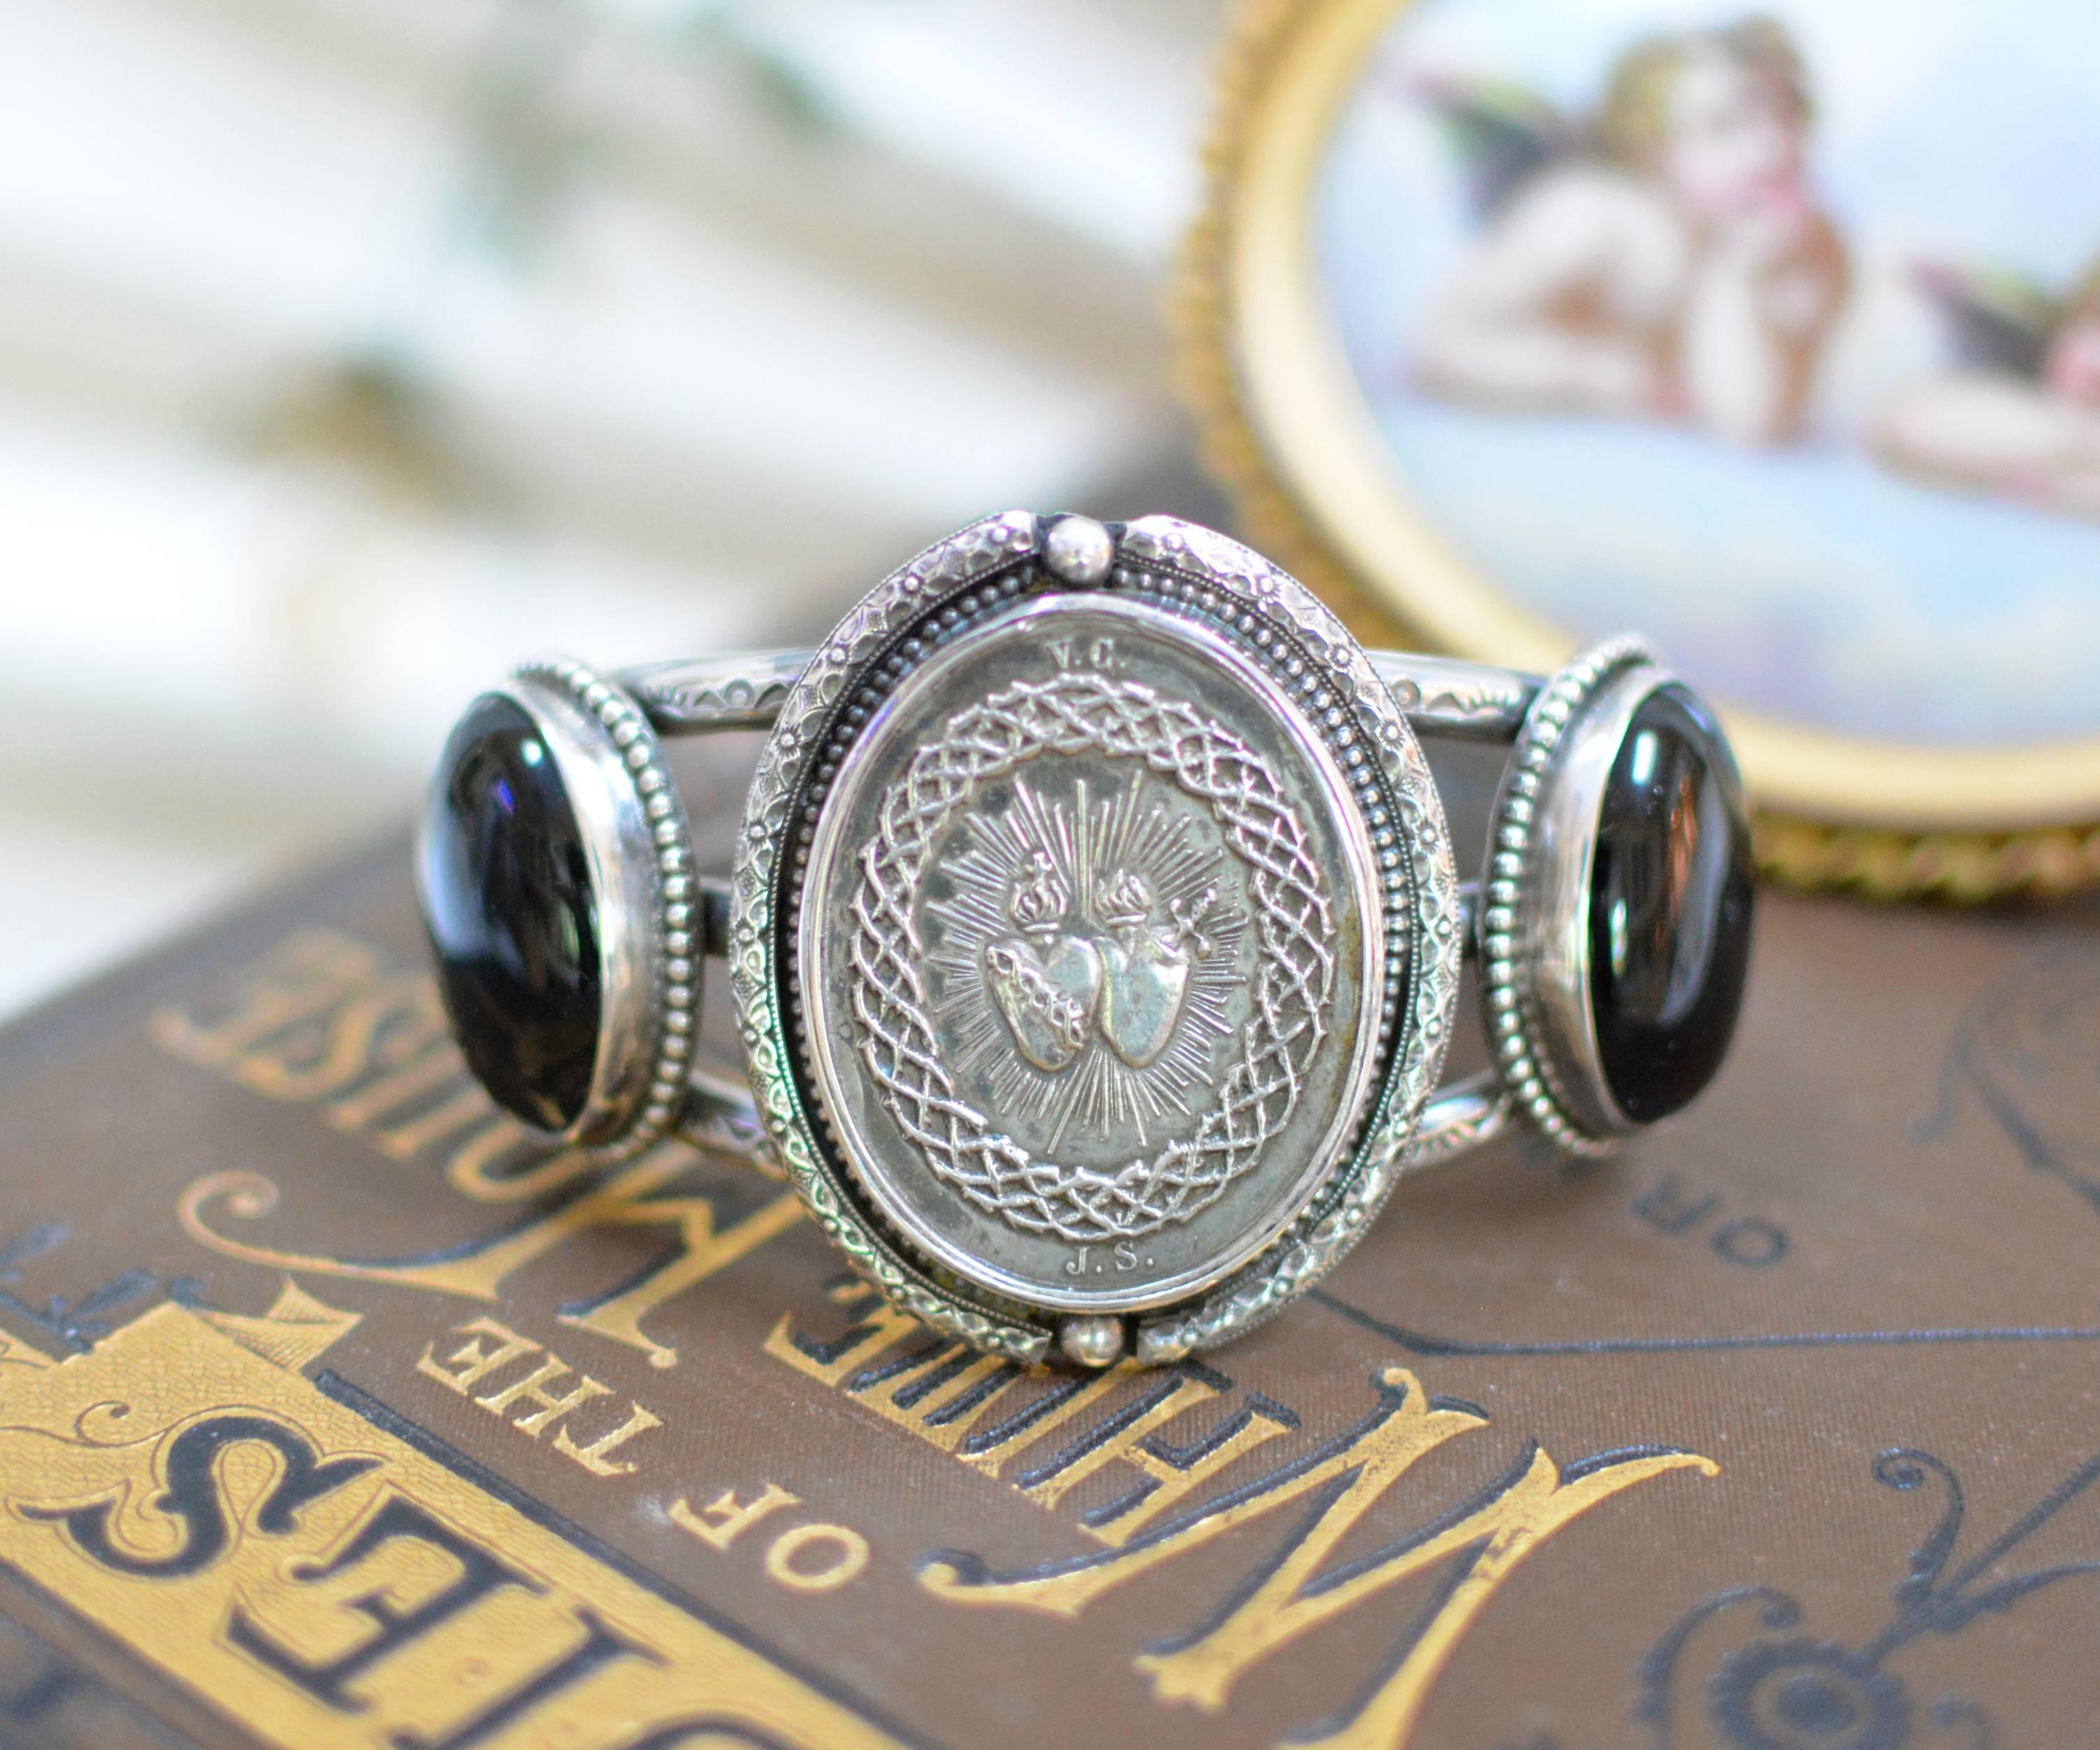 This one of a kind Sterling Silver cuff bracelet features an original antique nineteenth century French Sacred Heart Medal. Framed with ornate engraving and beadwork, we have used a pair 25 x 18 mm natural Black Onyx cabochons on either side.